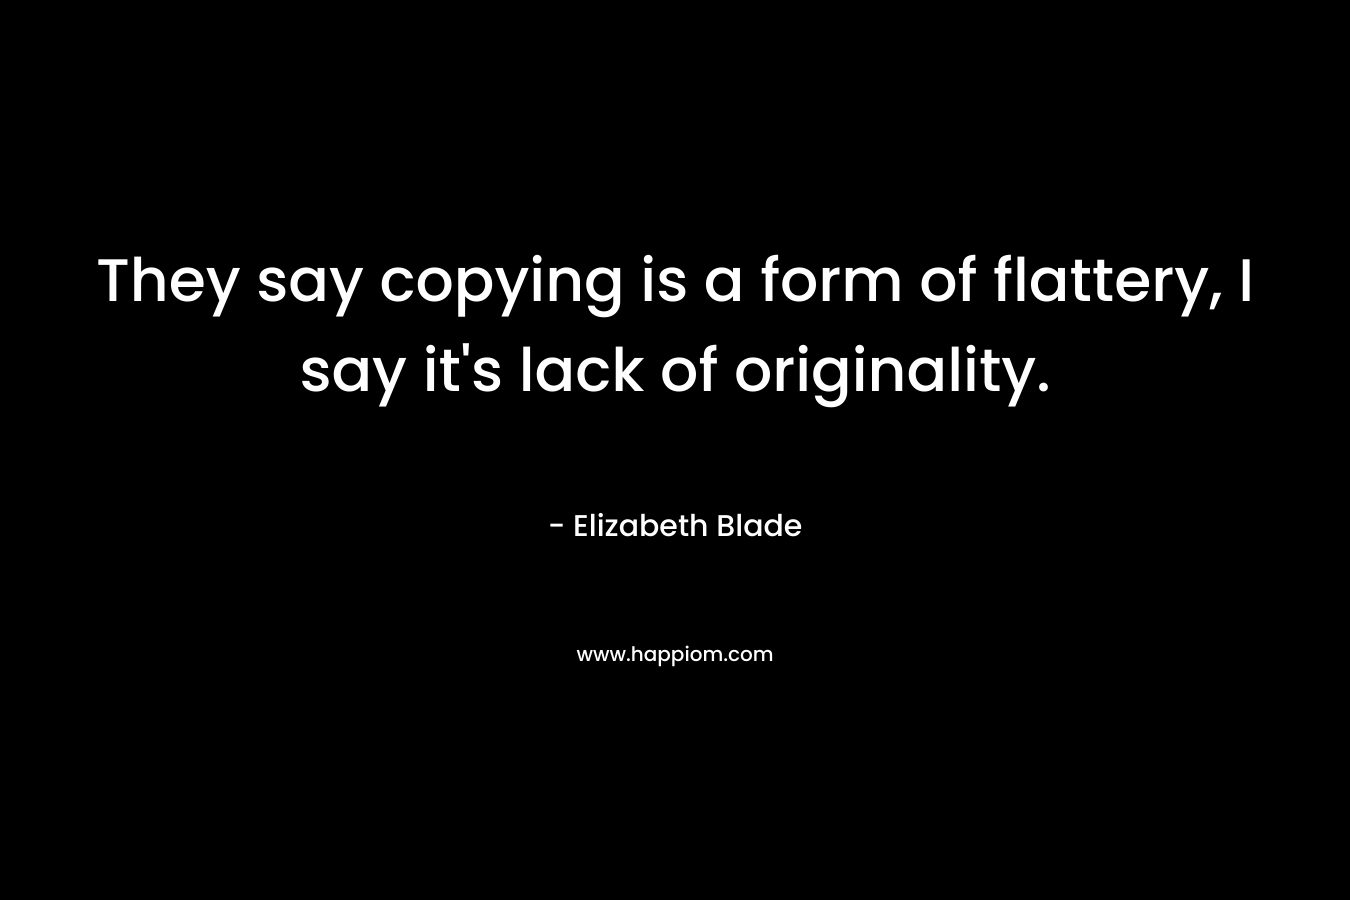 They say copying is a form of flattery, I say it's lack of originality.